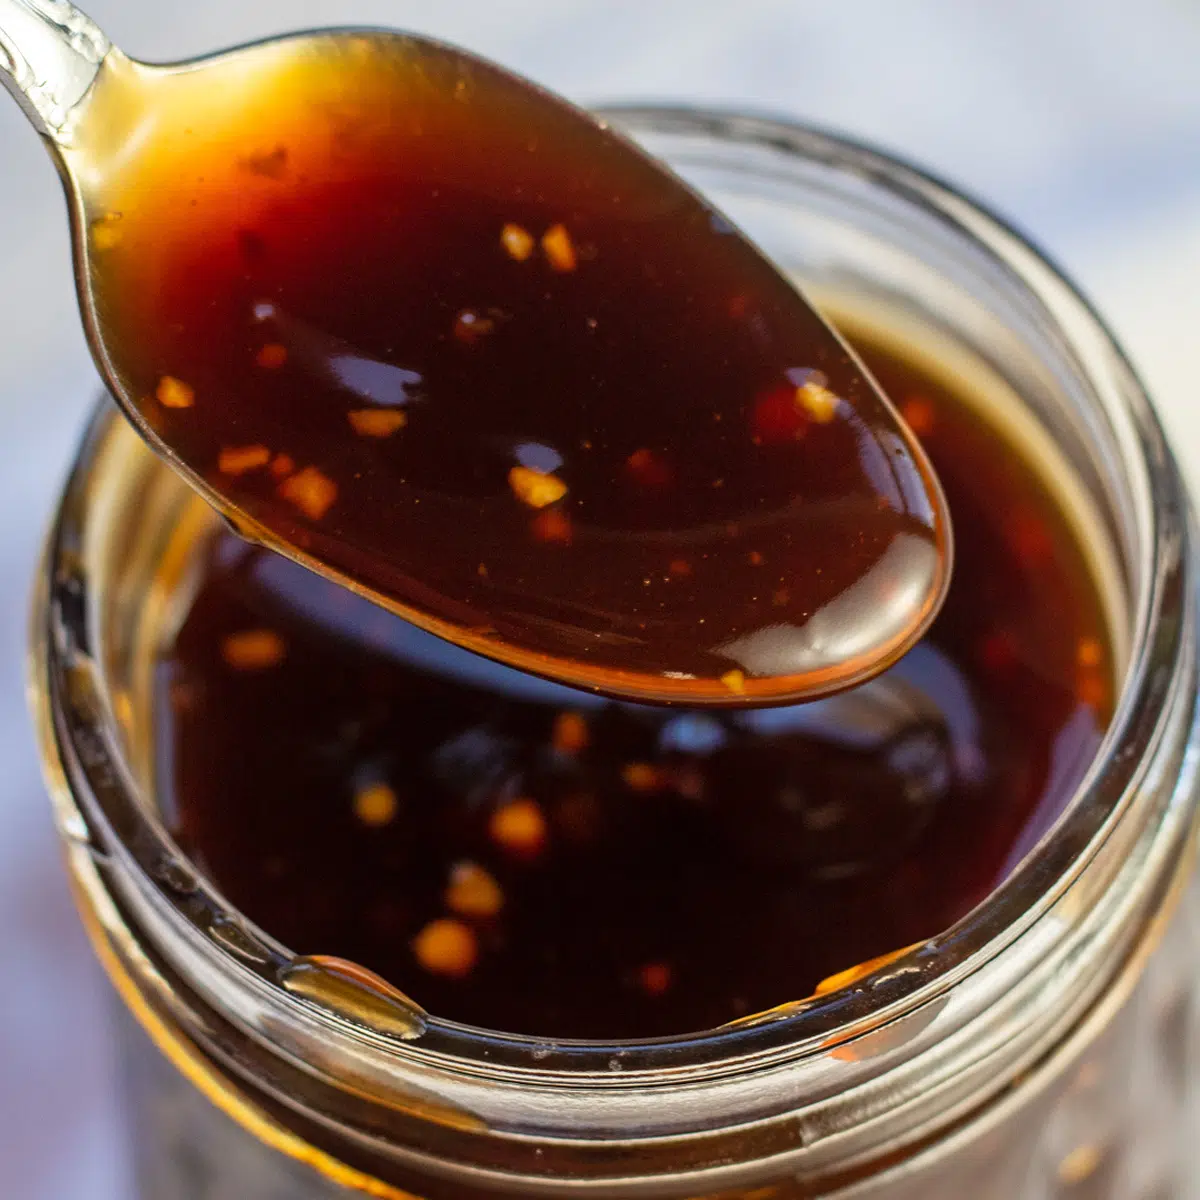 Tangy, thickened teriyaki sauce being spooned from glass jar.